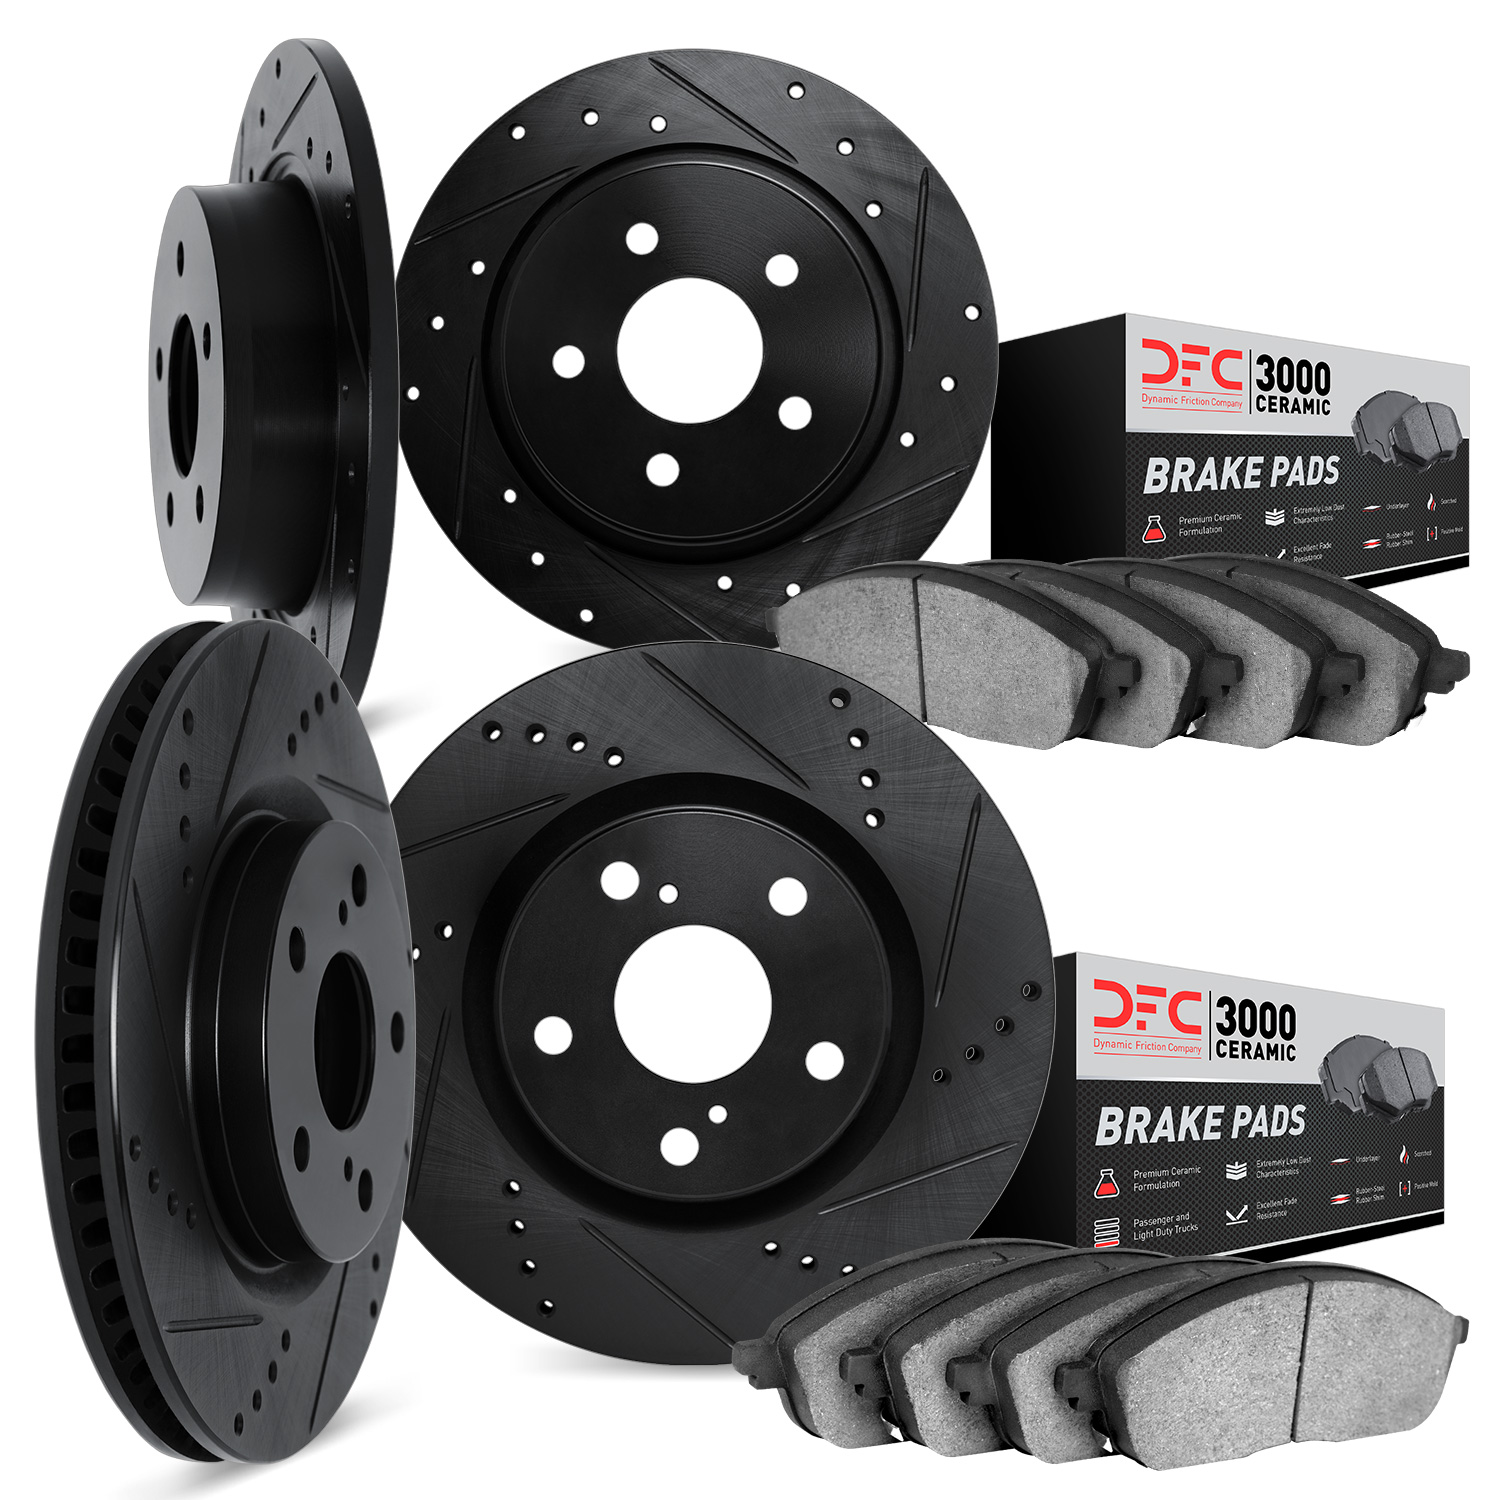 8304-32009 Drilled/Slotted Brake Rotors with 3000-Series Ceramic Brake Pads Kit [Black], Fits Select Mini, Position: Front and R